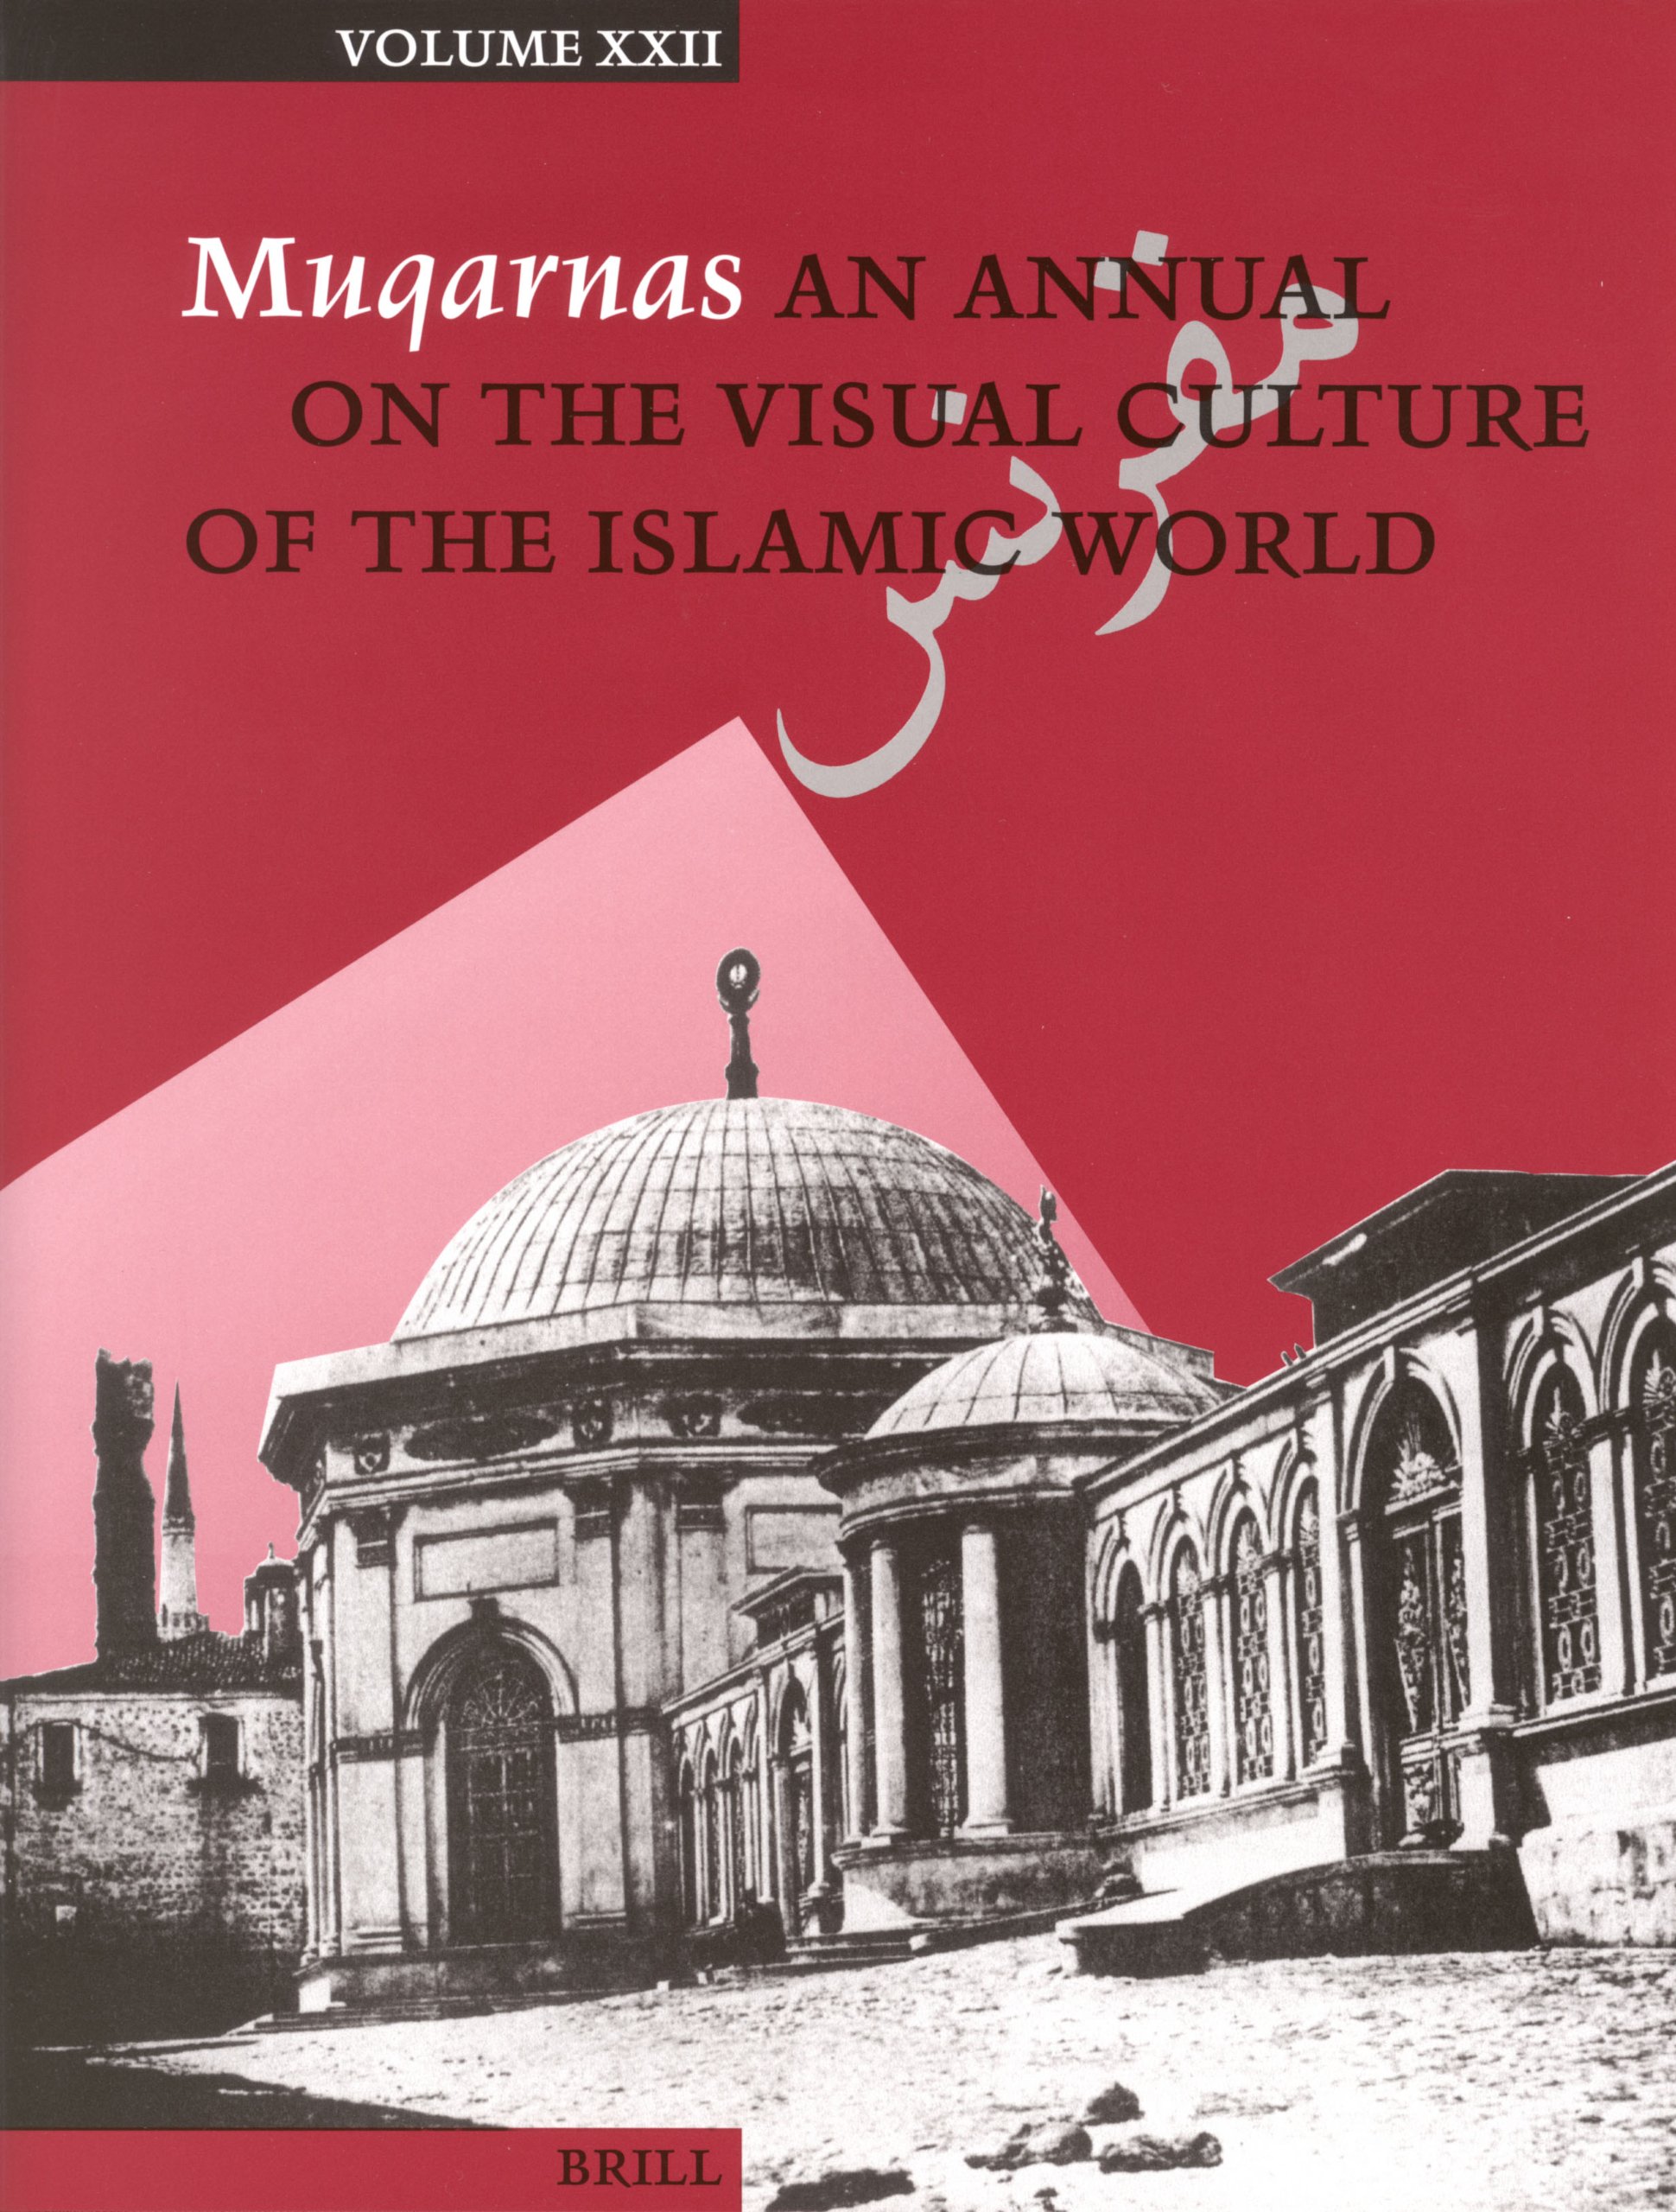 Aga Khan Program for Islamic Architecture  - <p>The Aga Khan Program at Harvard University publishes scholarly works on the history of Islamic art and architecture. Established in 1983,<em>&nbsp;Muqarnas: An Annual on the Visual Cultures of the Islamic World</em>,&nbsp;devoted primarily to the history of Islamic art and architecture, is a lively forum for discussion among scholars and students in the West and in the Islamic world. Subjects to be covered in its pages will include the whole sweep of Islamic art and architectural history up to present time, with attention devoted as well to aspects of Islamic culture, history, and learning.</p>